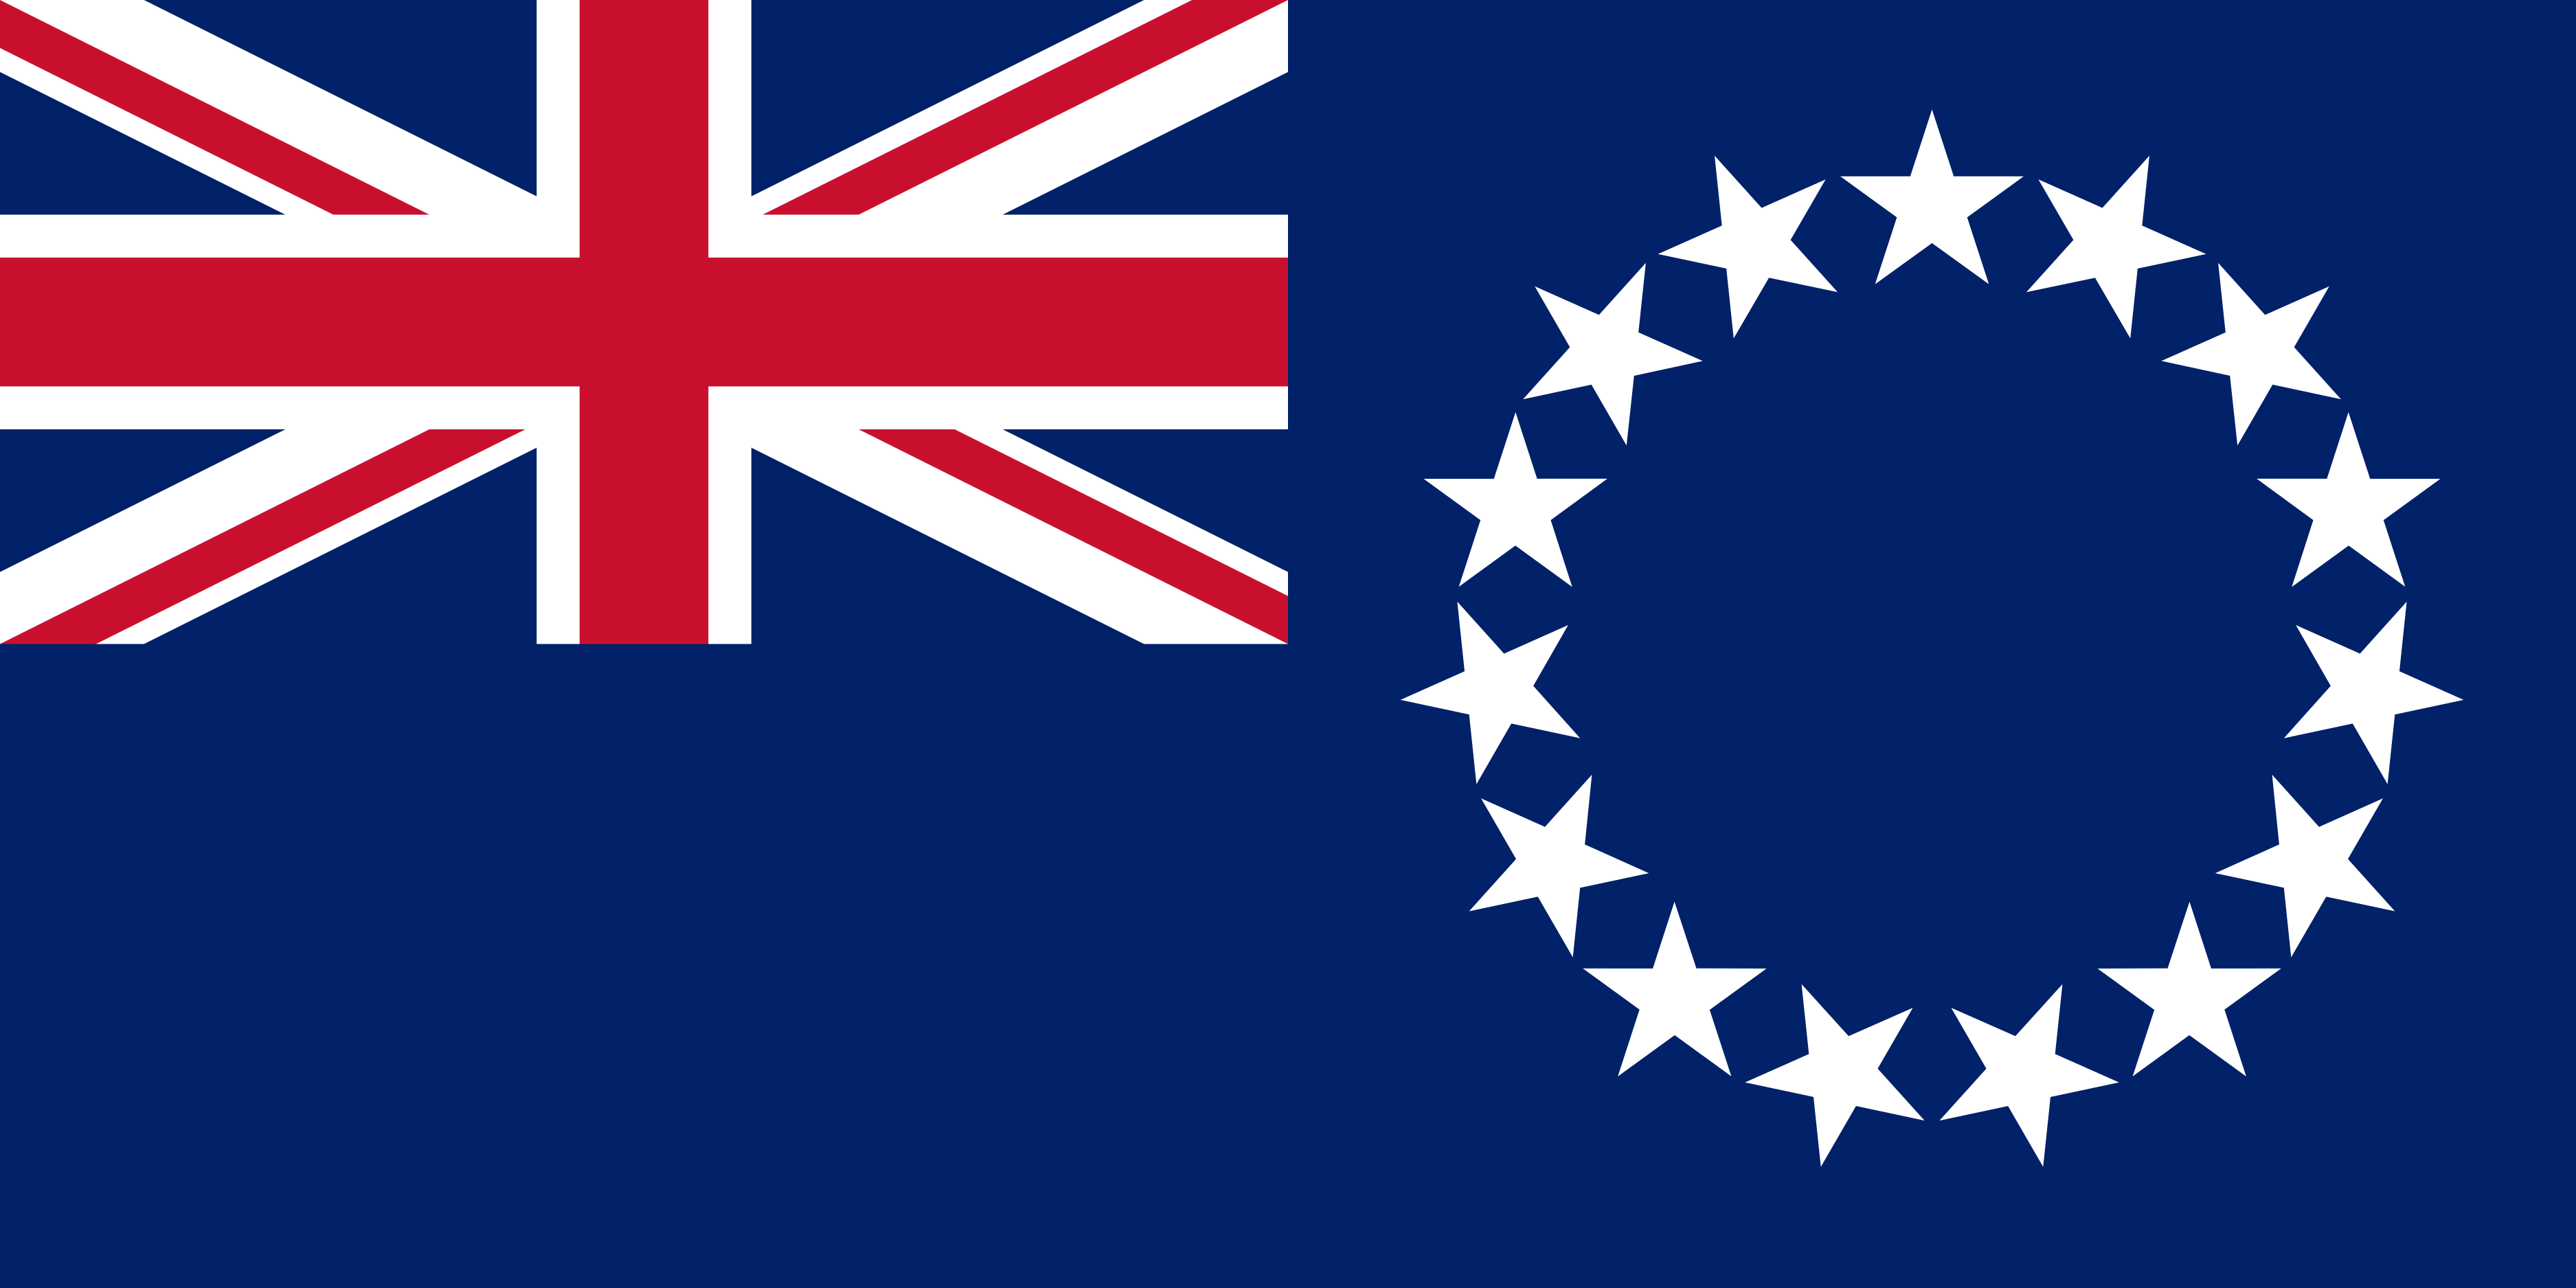 Free Cook Islands Flag Documents: PDF, DOC, DOCX, HTML & More!